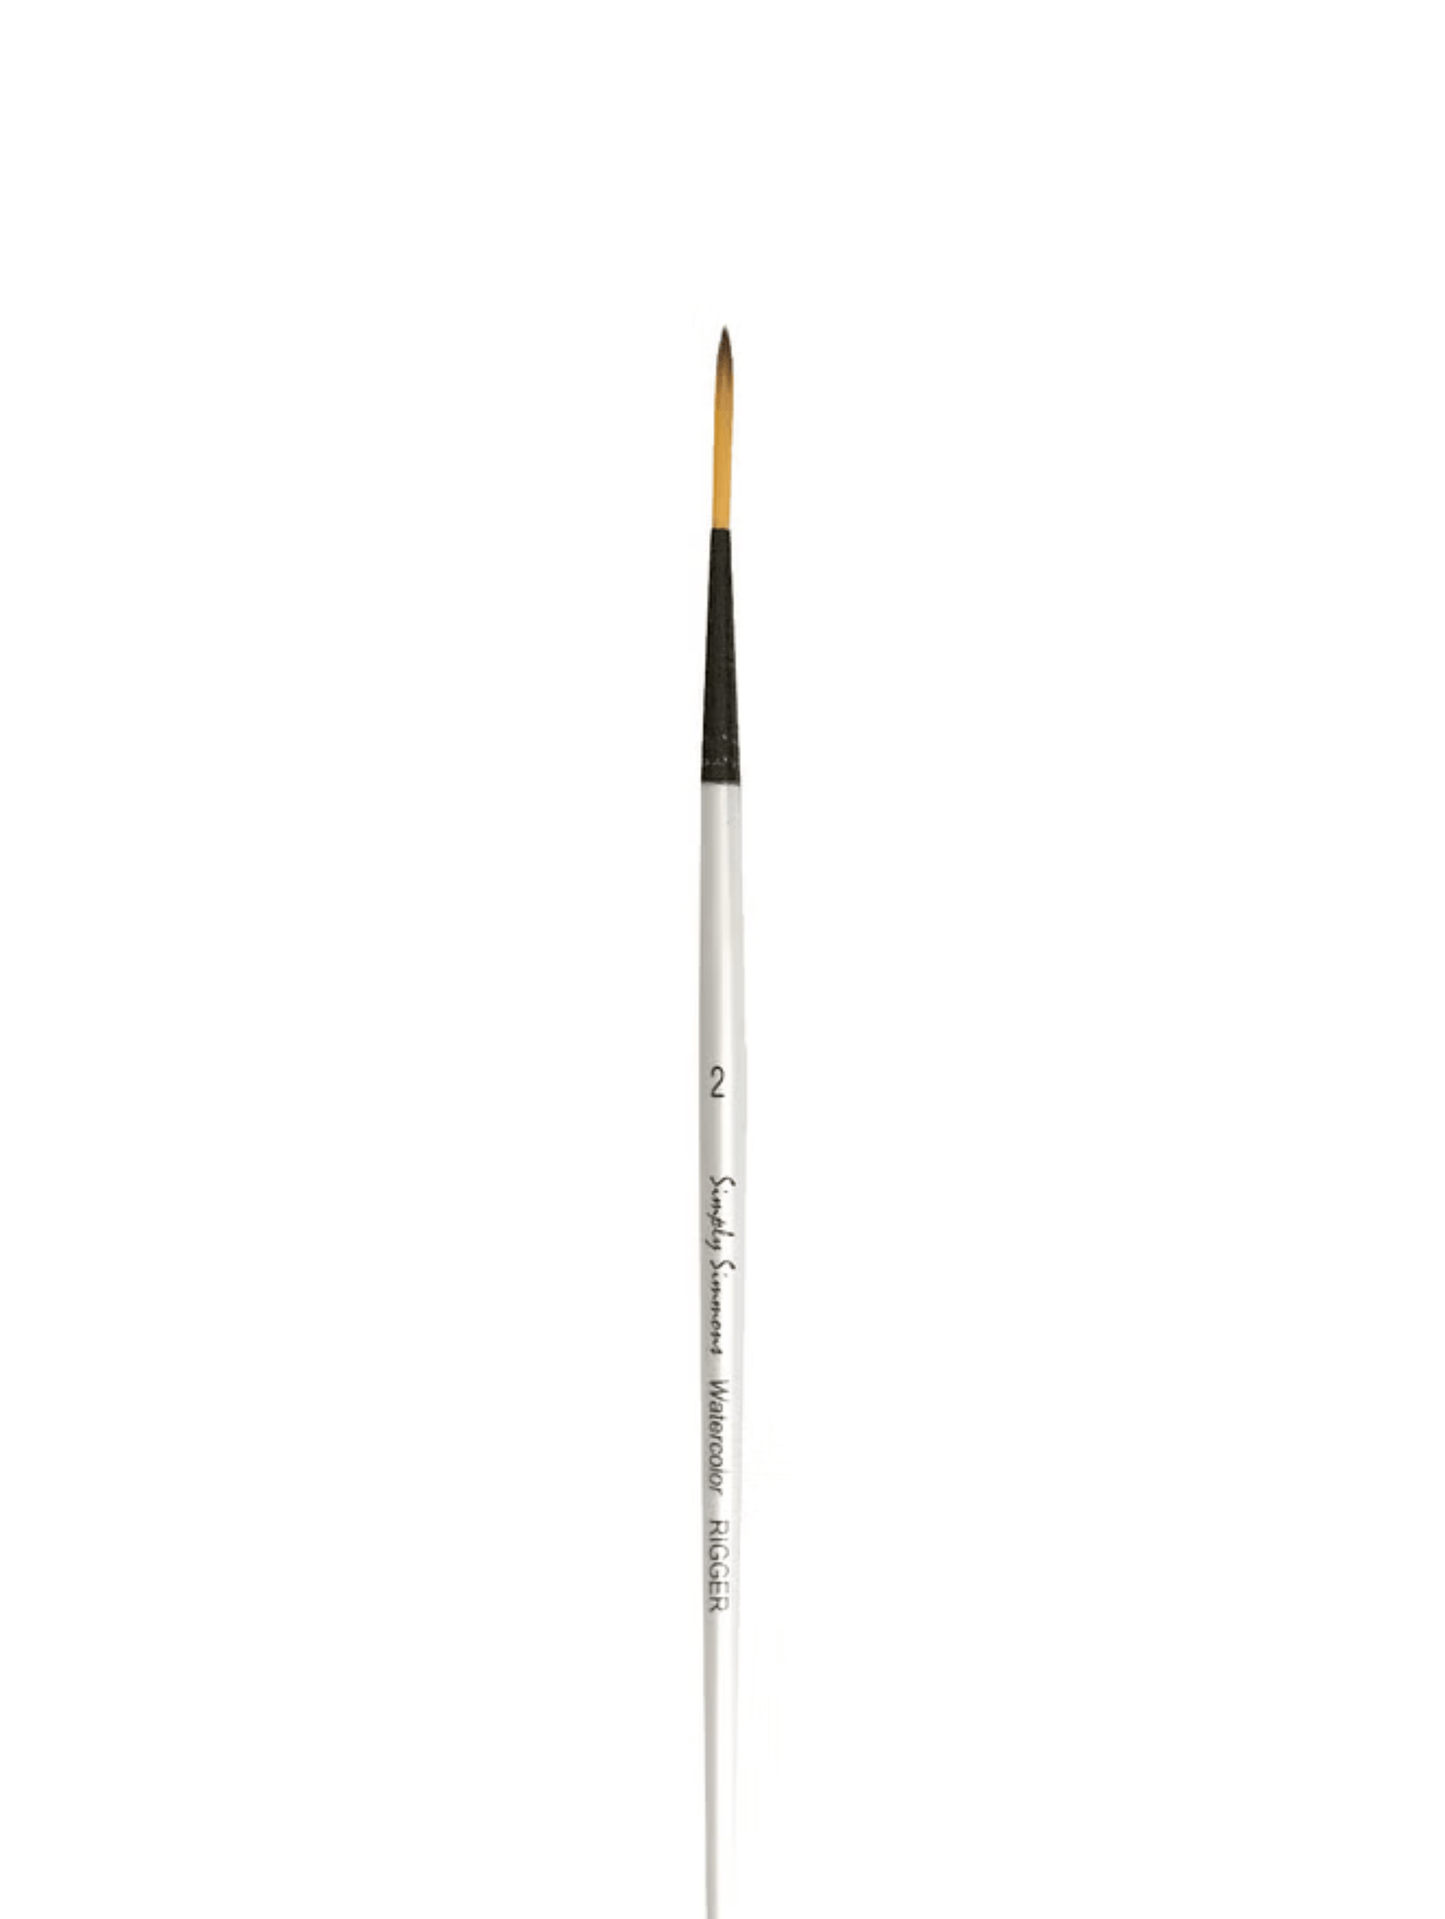 SIMPLY SIMMONS Synthetic Brush #2 Simply Simmons - Specialty Brushes - Rigger